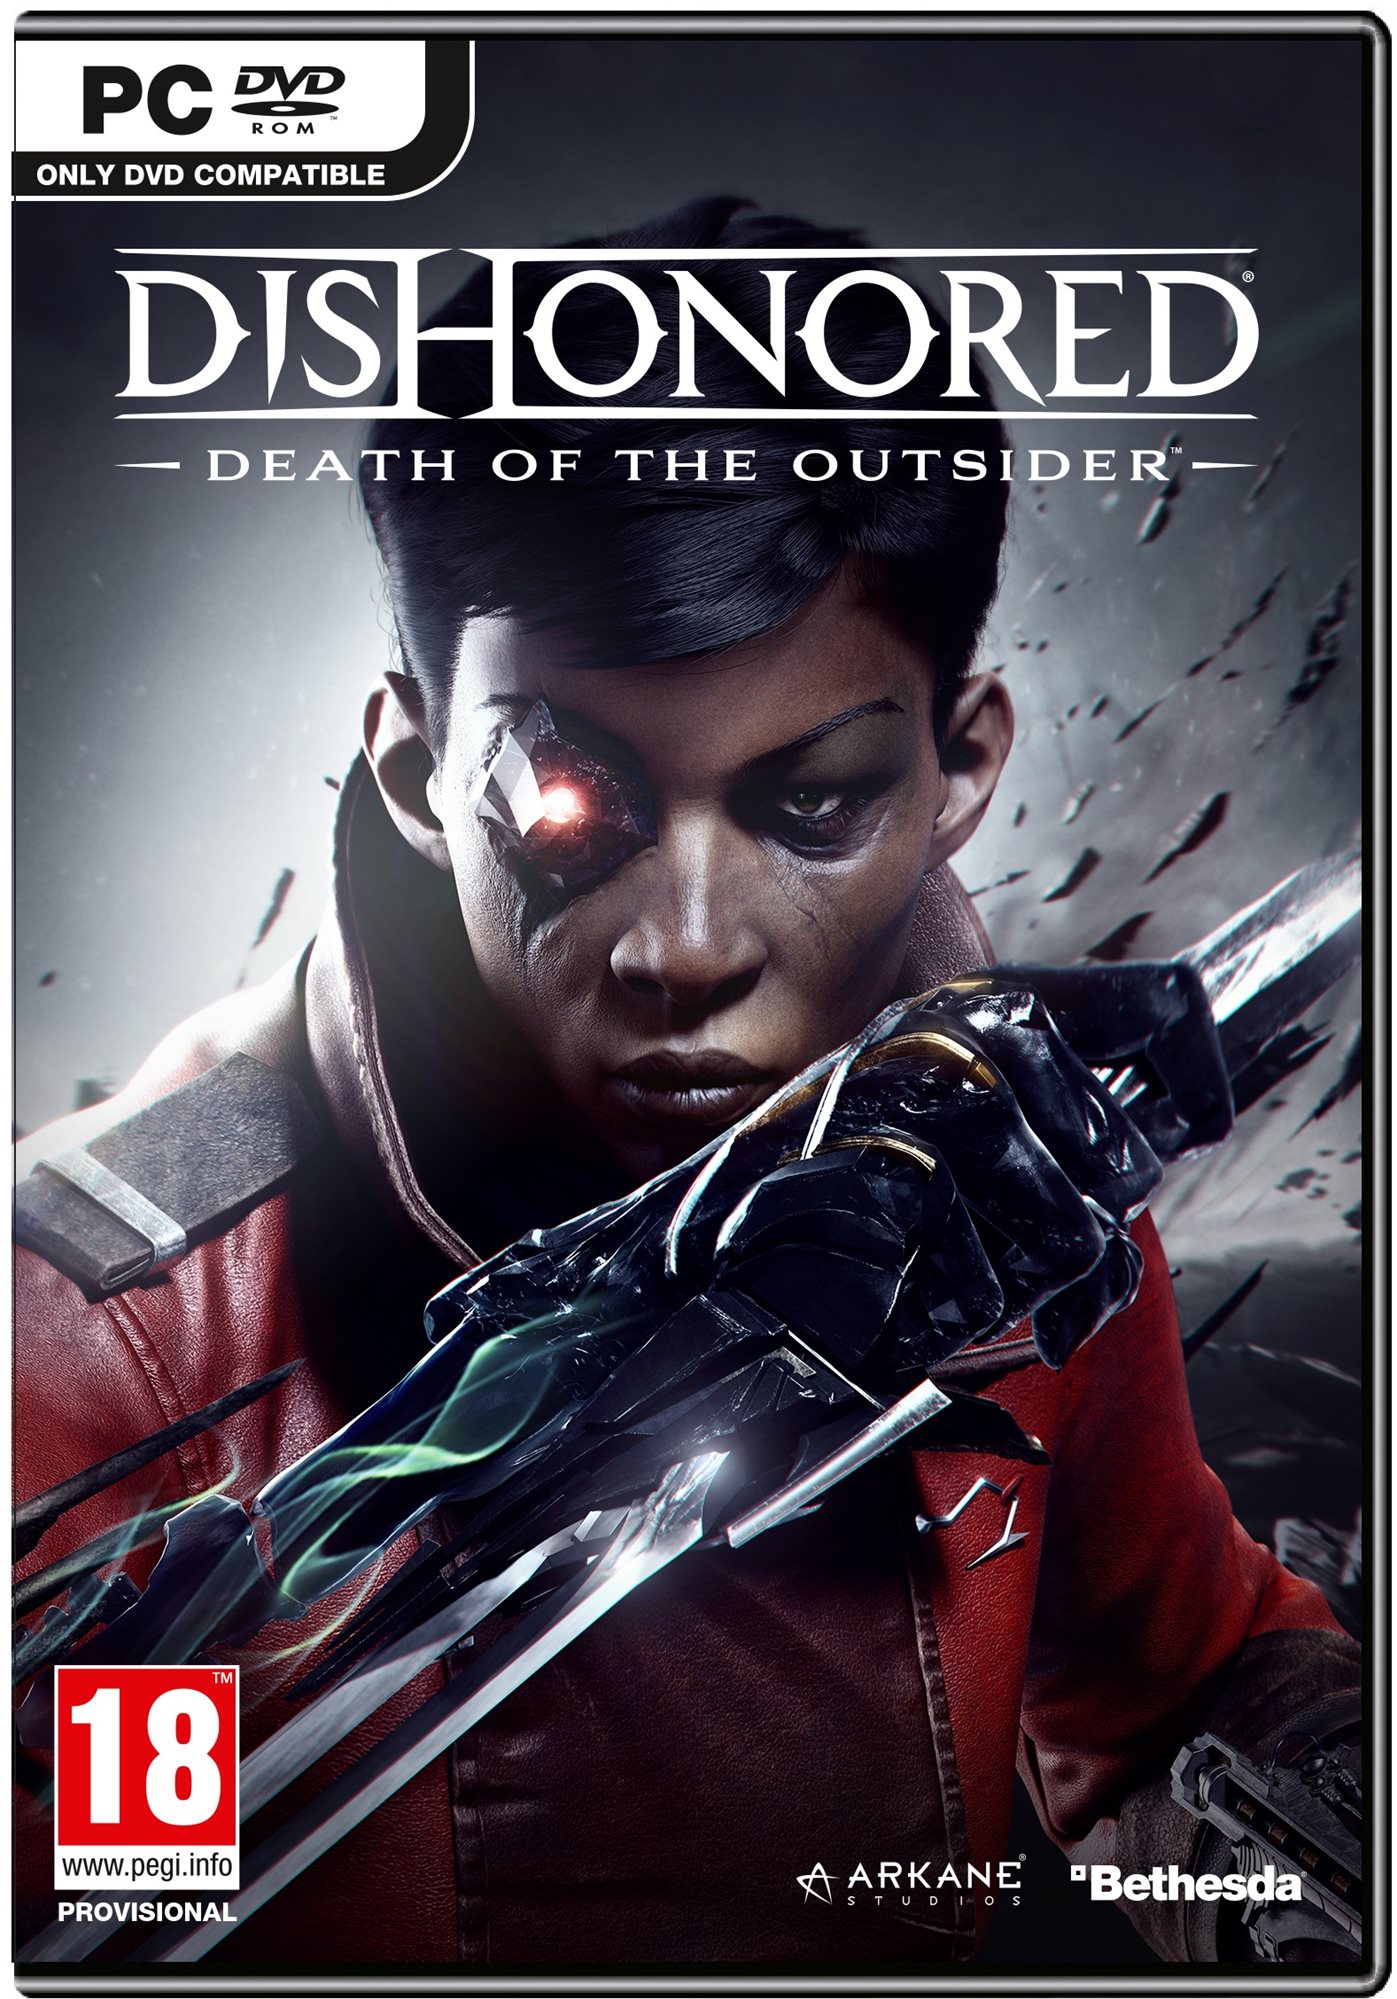 PC játék Dishonored: Death of the Outsider